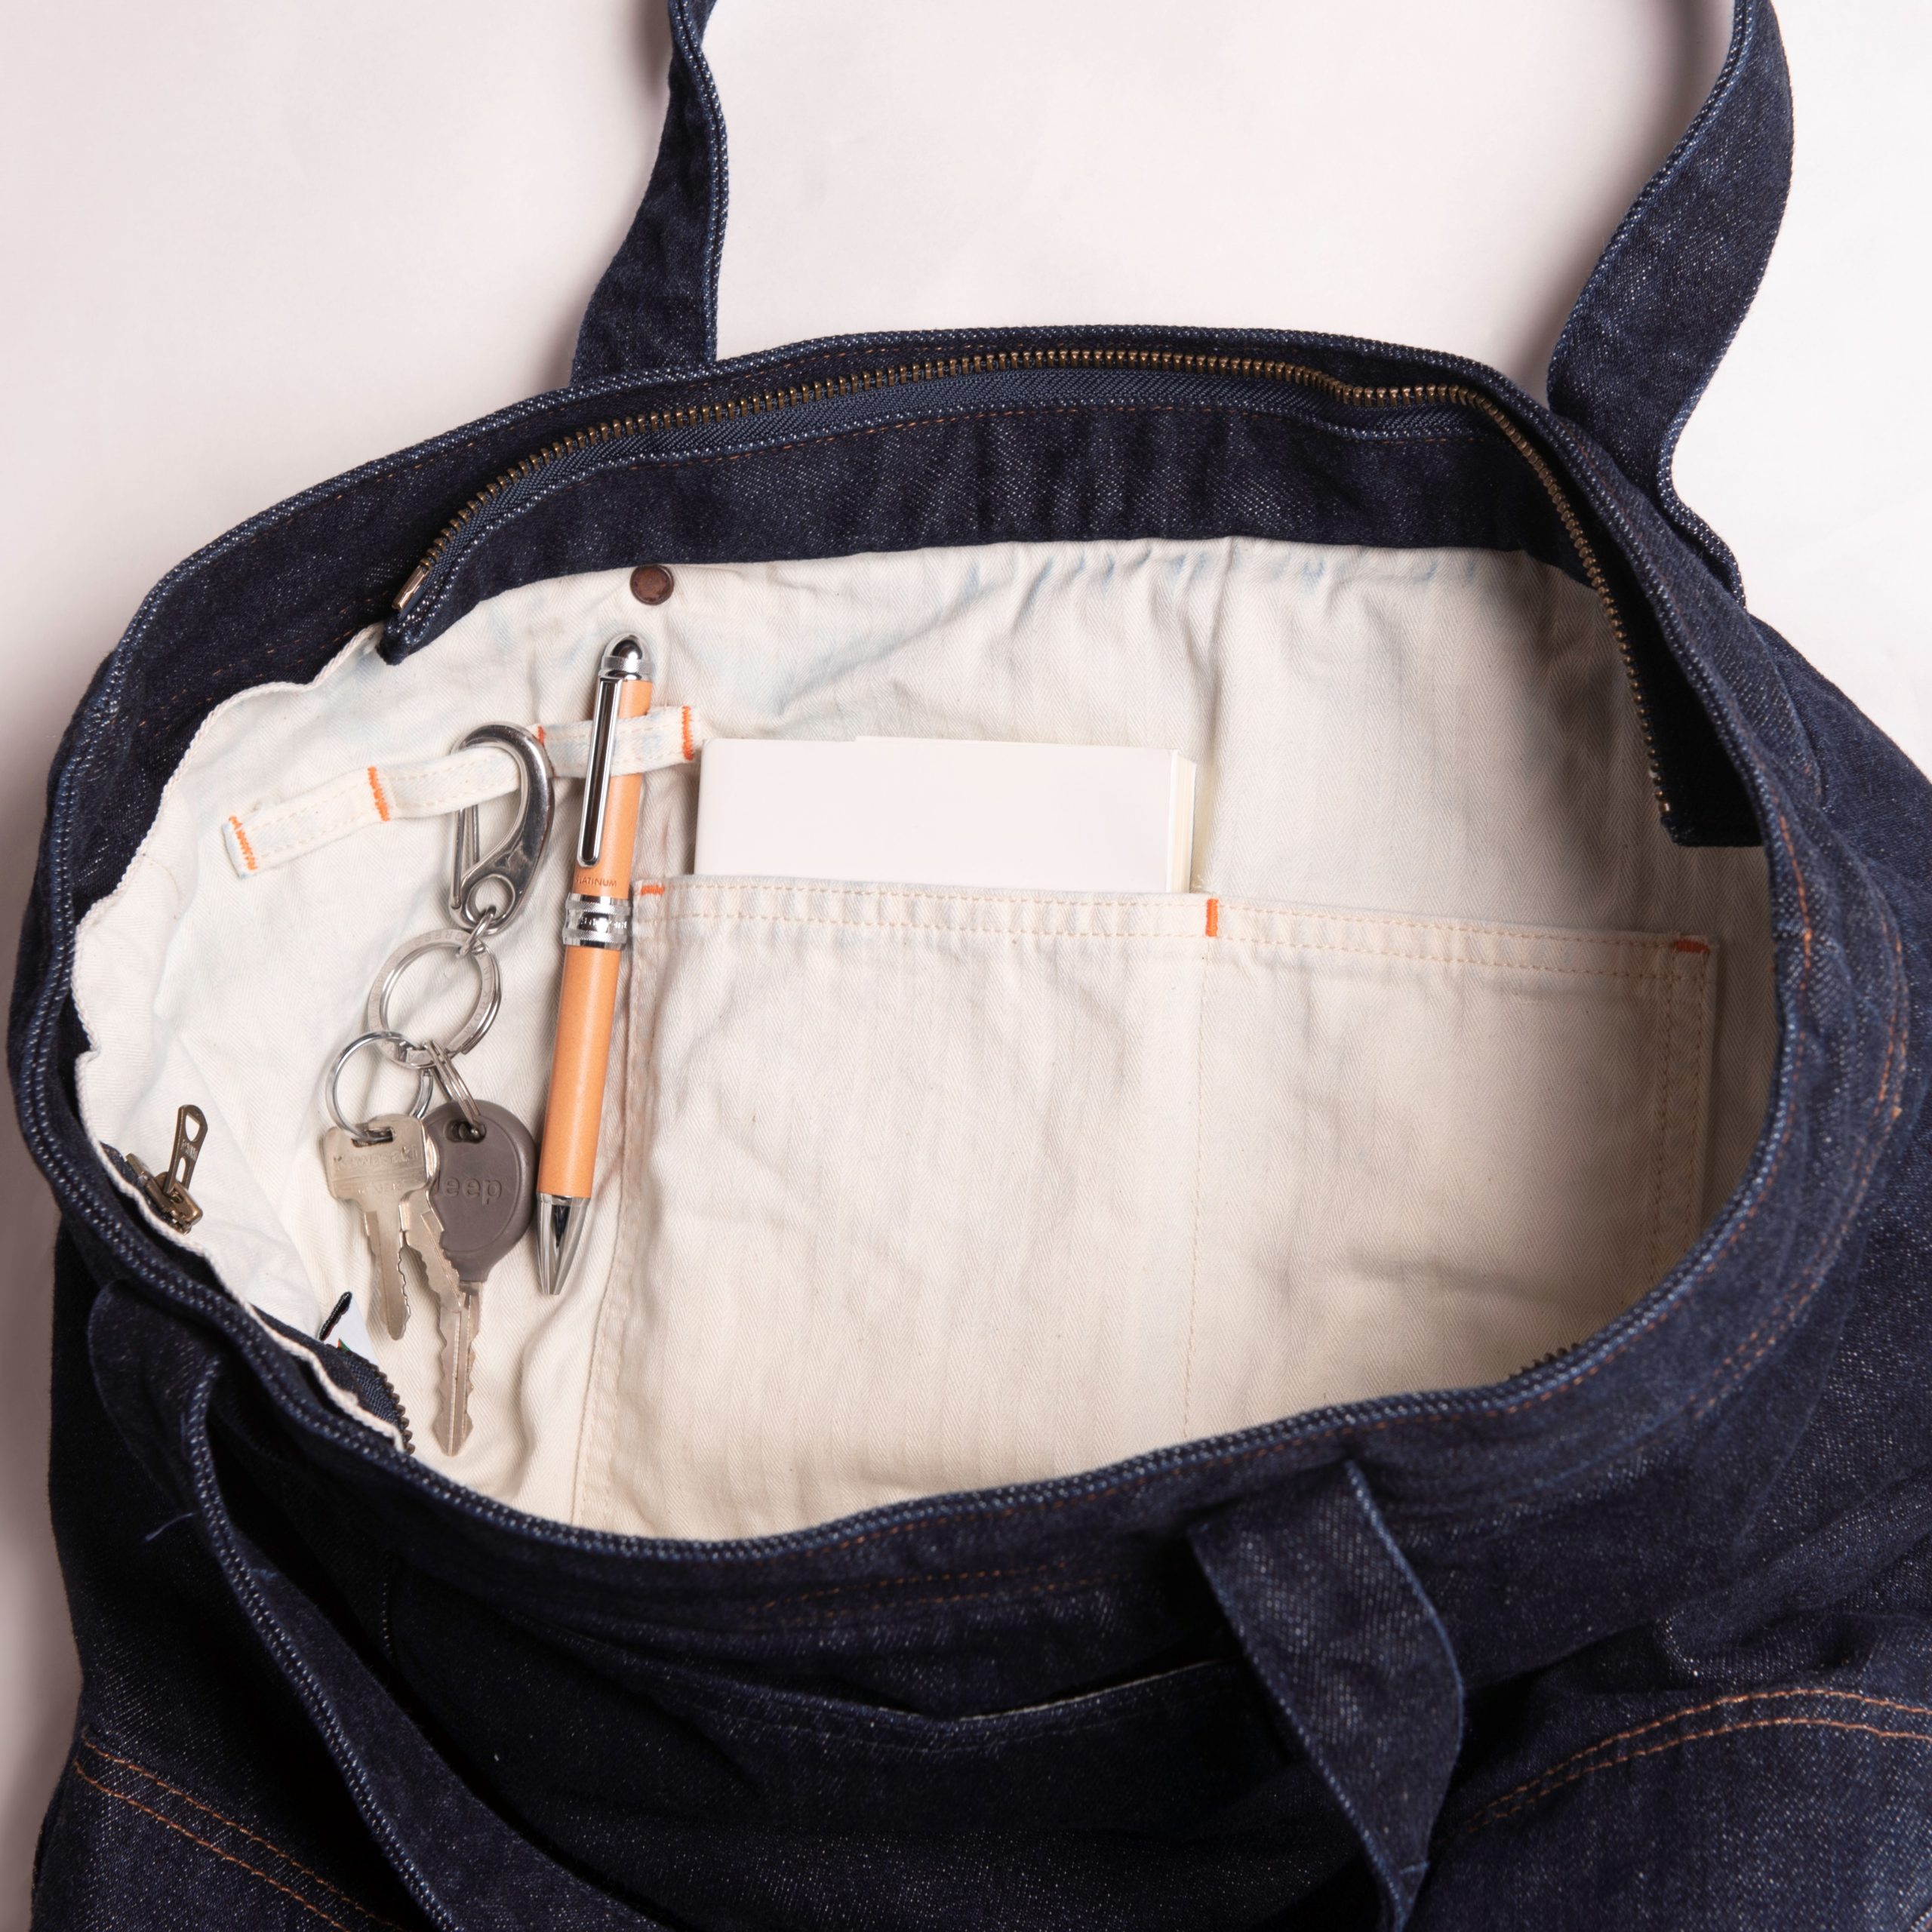 SELVEDGE DENIM CARRY-ON TOTE  BAG OW【セルヴィッジ デニム キャリーオン トートバッグ OW】